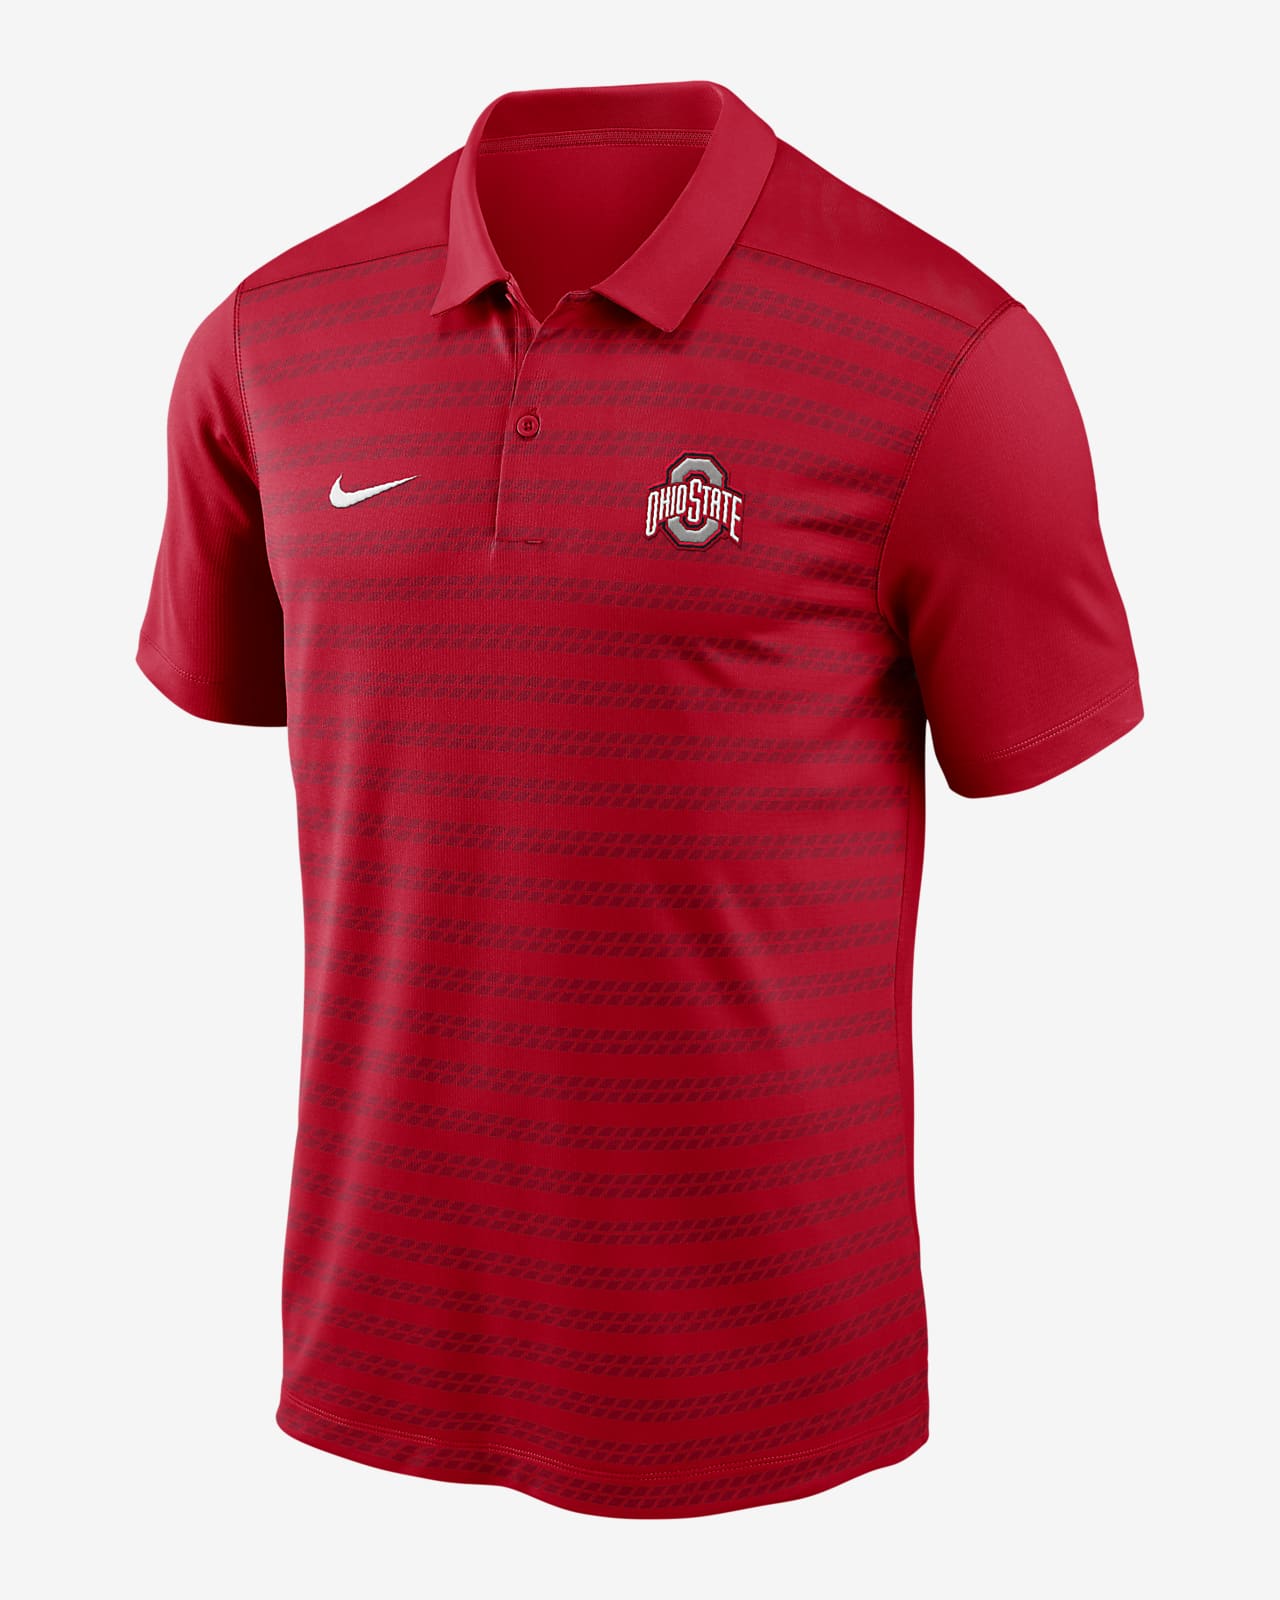 Ohio State Buckeyes Sideline Victory Men's Nike Dri-FIT College Polo